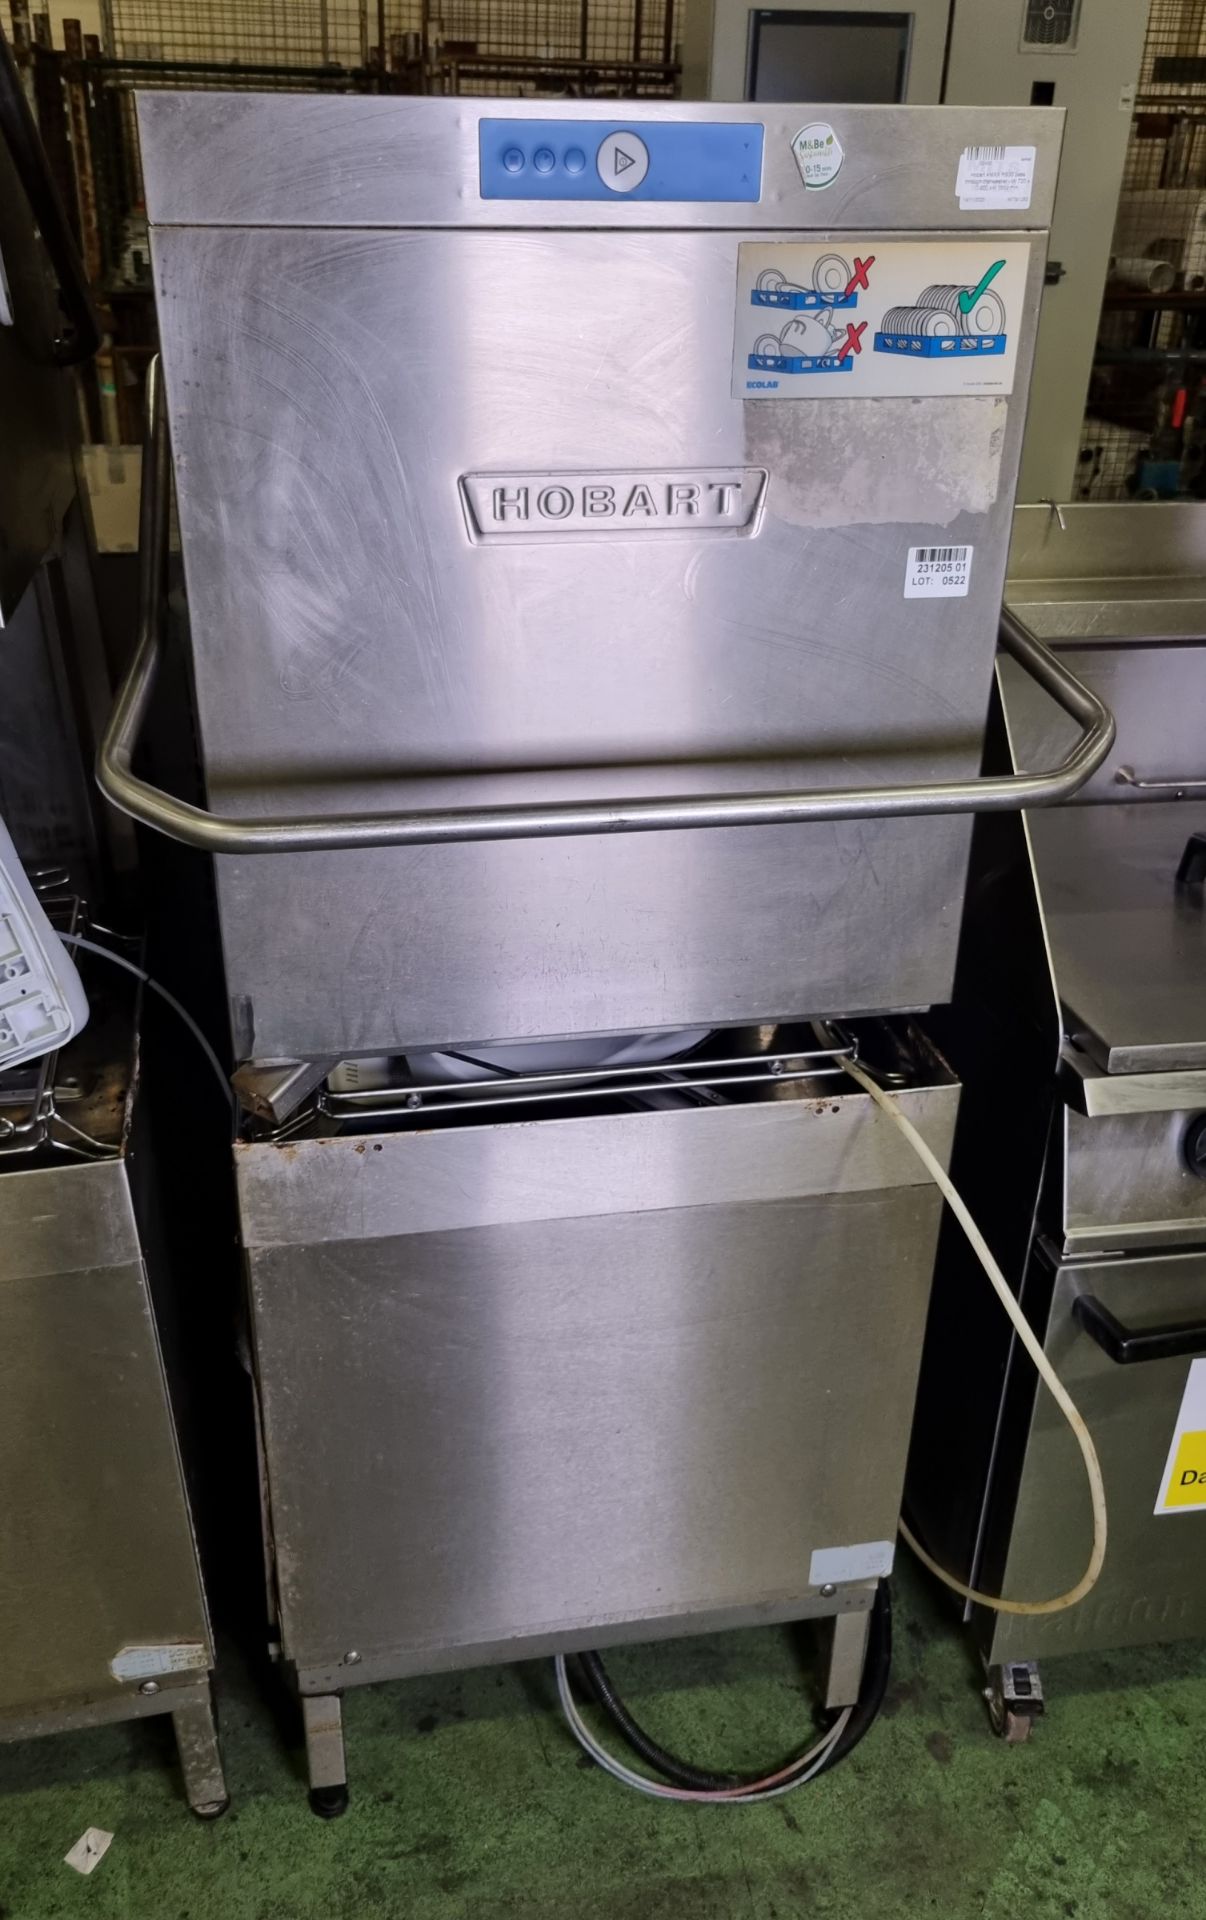 Hobart AMXX RS30 pass through dishwasher with Ecolab solid dosing unit - W 720 x D 900 x H 1550 mm - Image 4 of 4